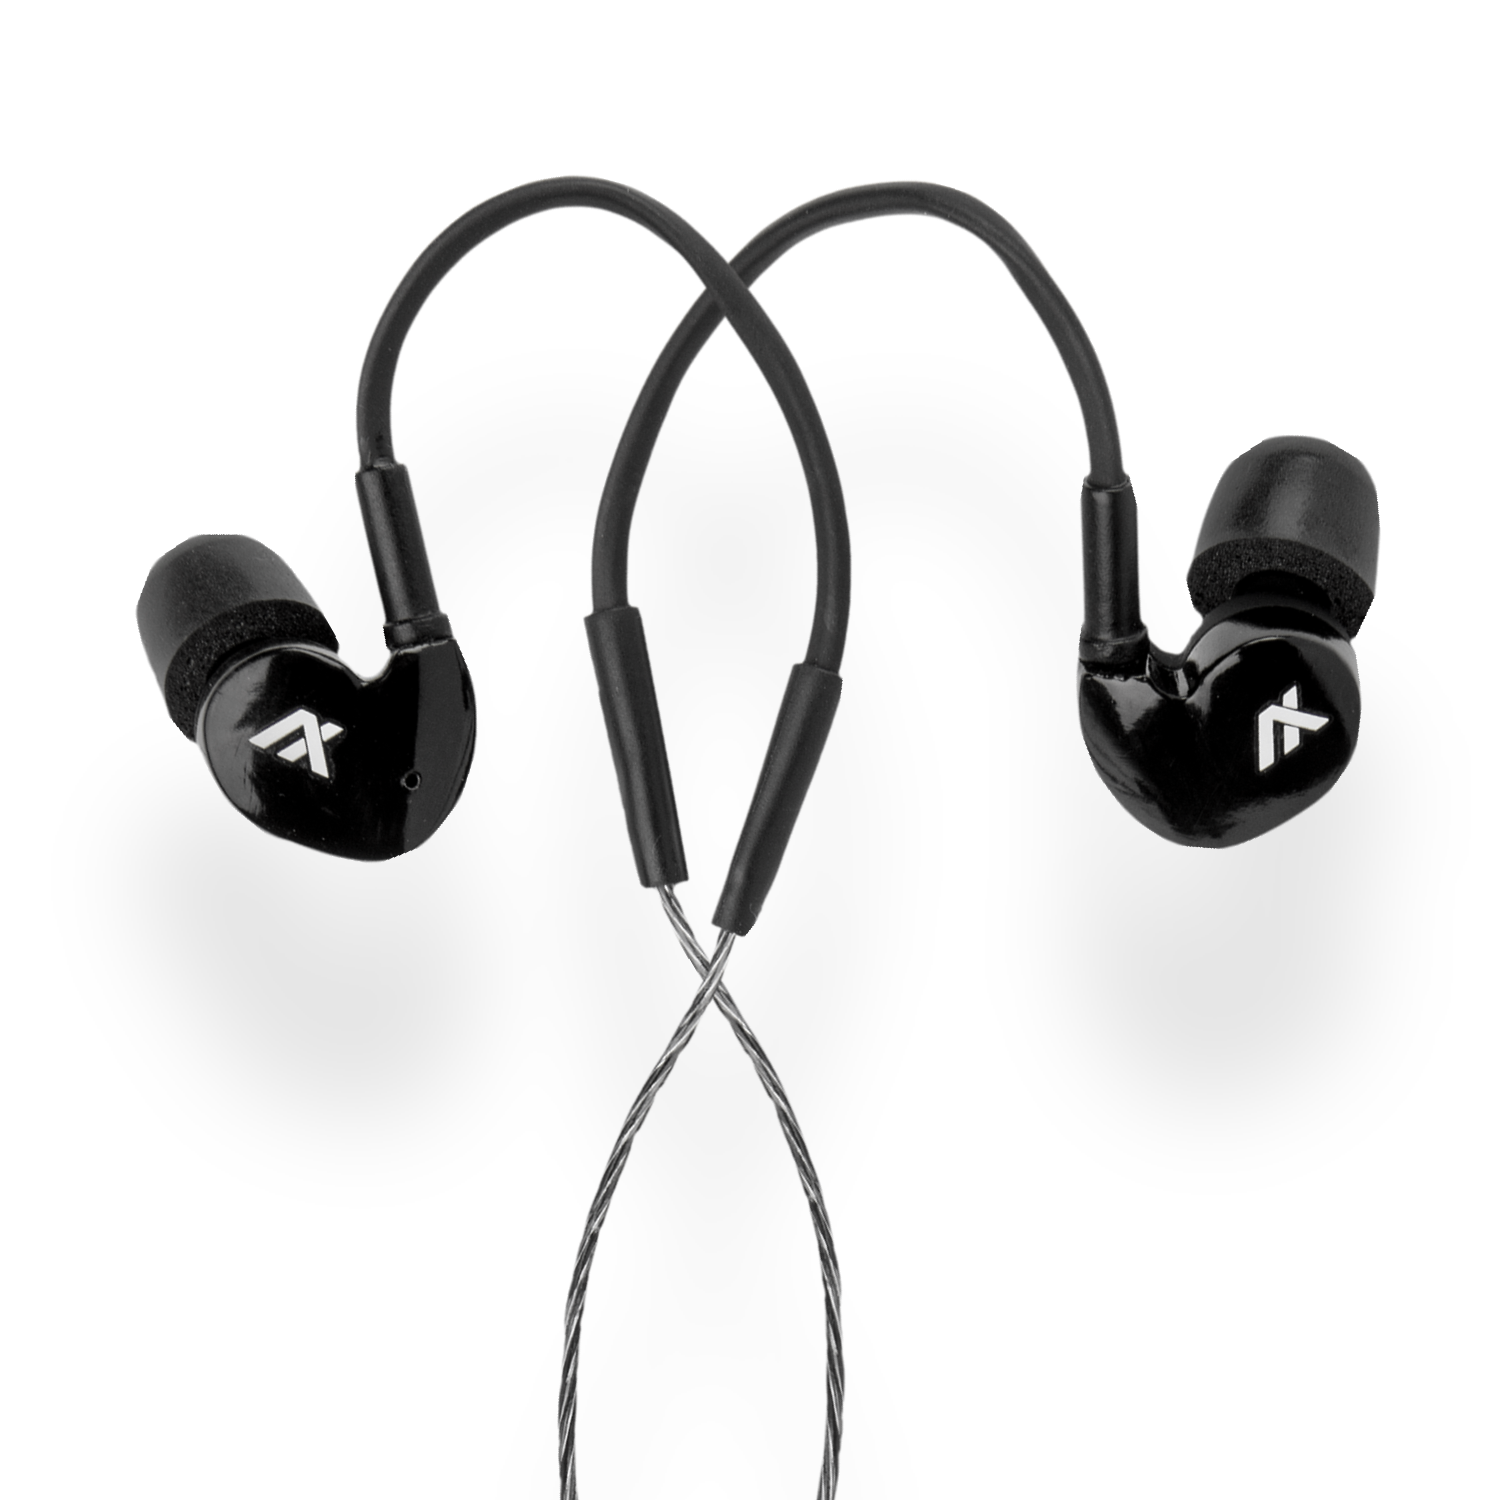 Axil GS Extreme 2.0 Bluetooth Ear Buds/Hearing Protection 50% off $99.99 + free shipping.